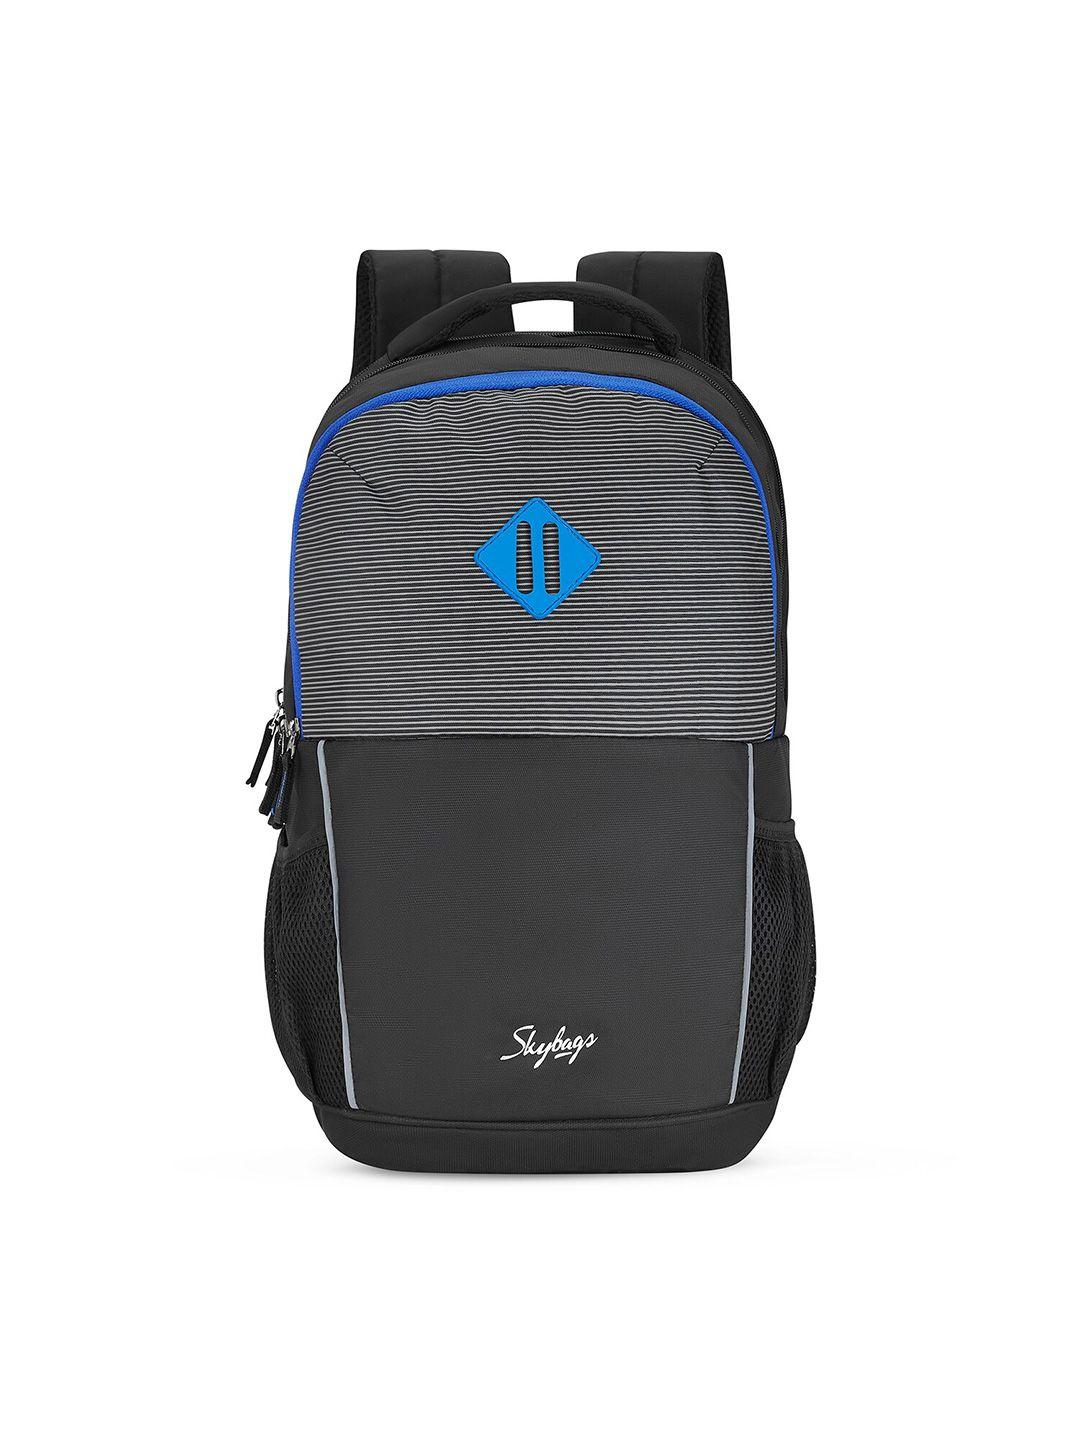 skybags-striped-backpack-with-a-laptop-compartment